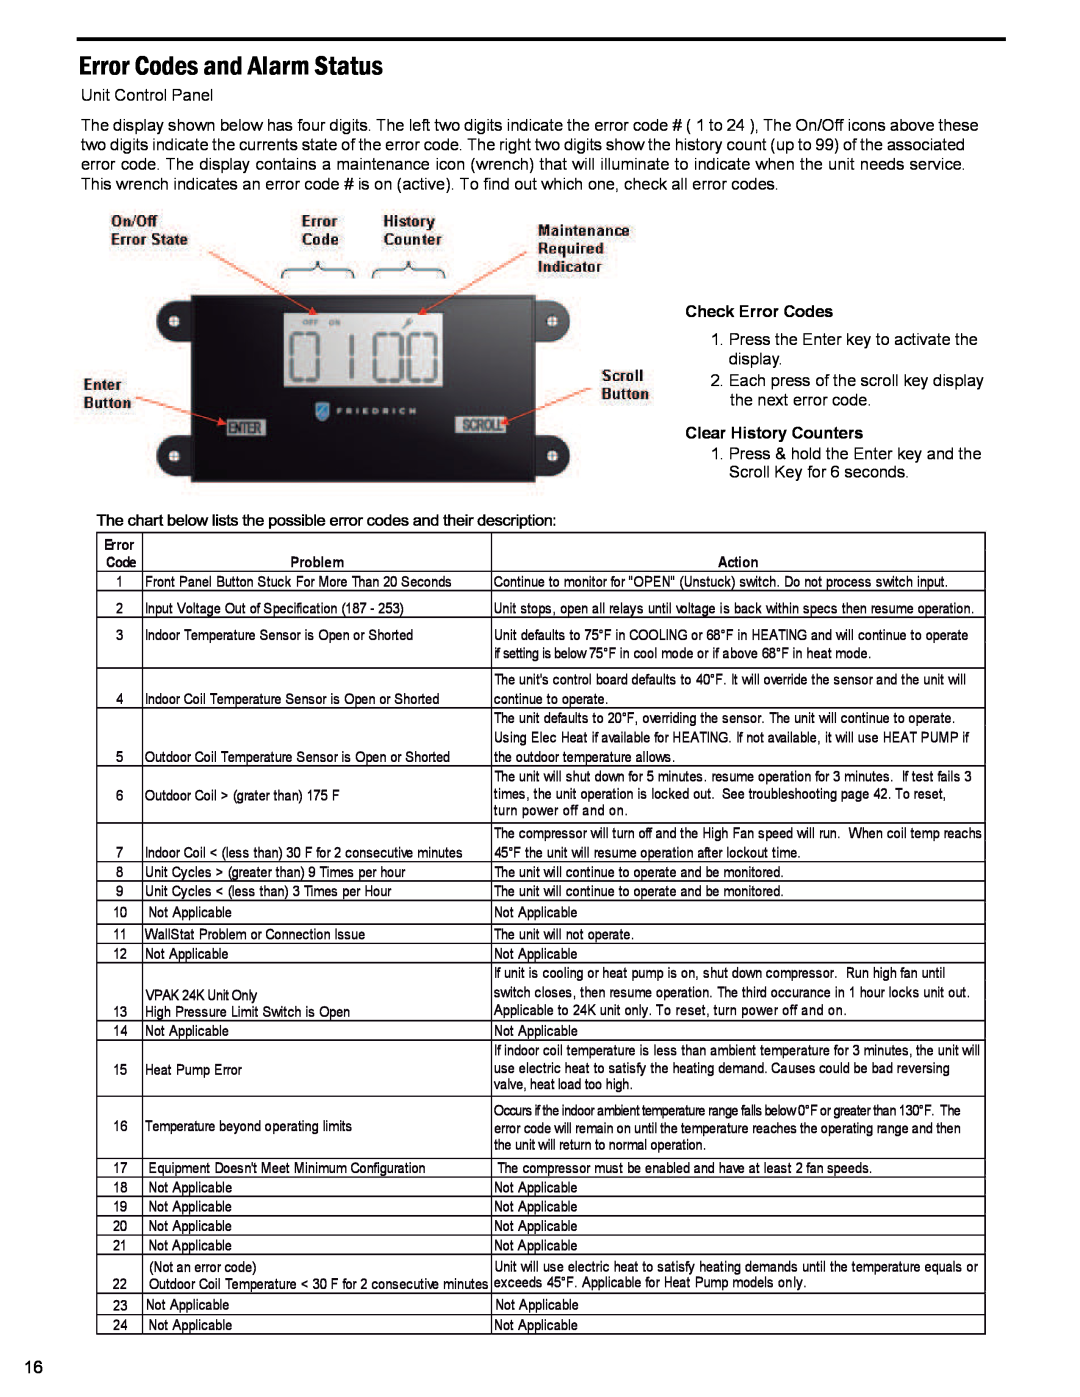 Friedrich R410A Error Codes And Alarm Status, Check Error Codes, Clear History Counters, Scroll Key for 6 seconds, Problem 